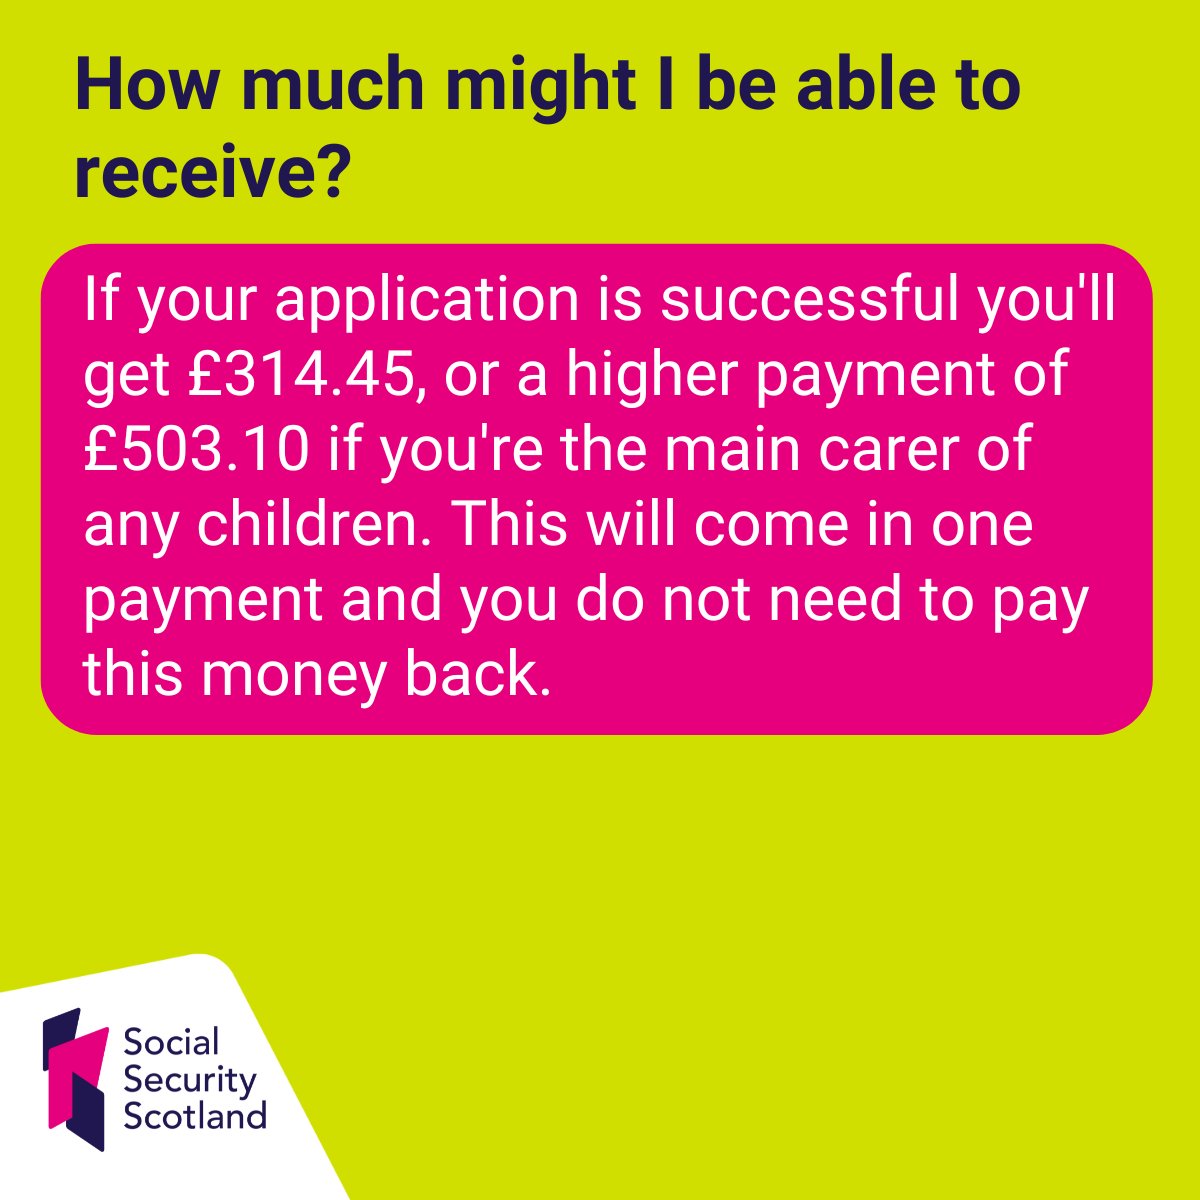 Job Start Payment helps people aged 16-24, who have been out of paid work and receiving a qualifying benefit for 6 months, with the costs of starting a new job. The job can be for any paid employment, including apprenticeships. More at mygov.scot/jobstartpayment